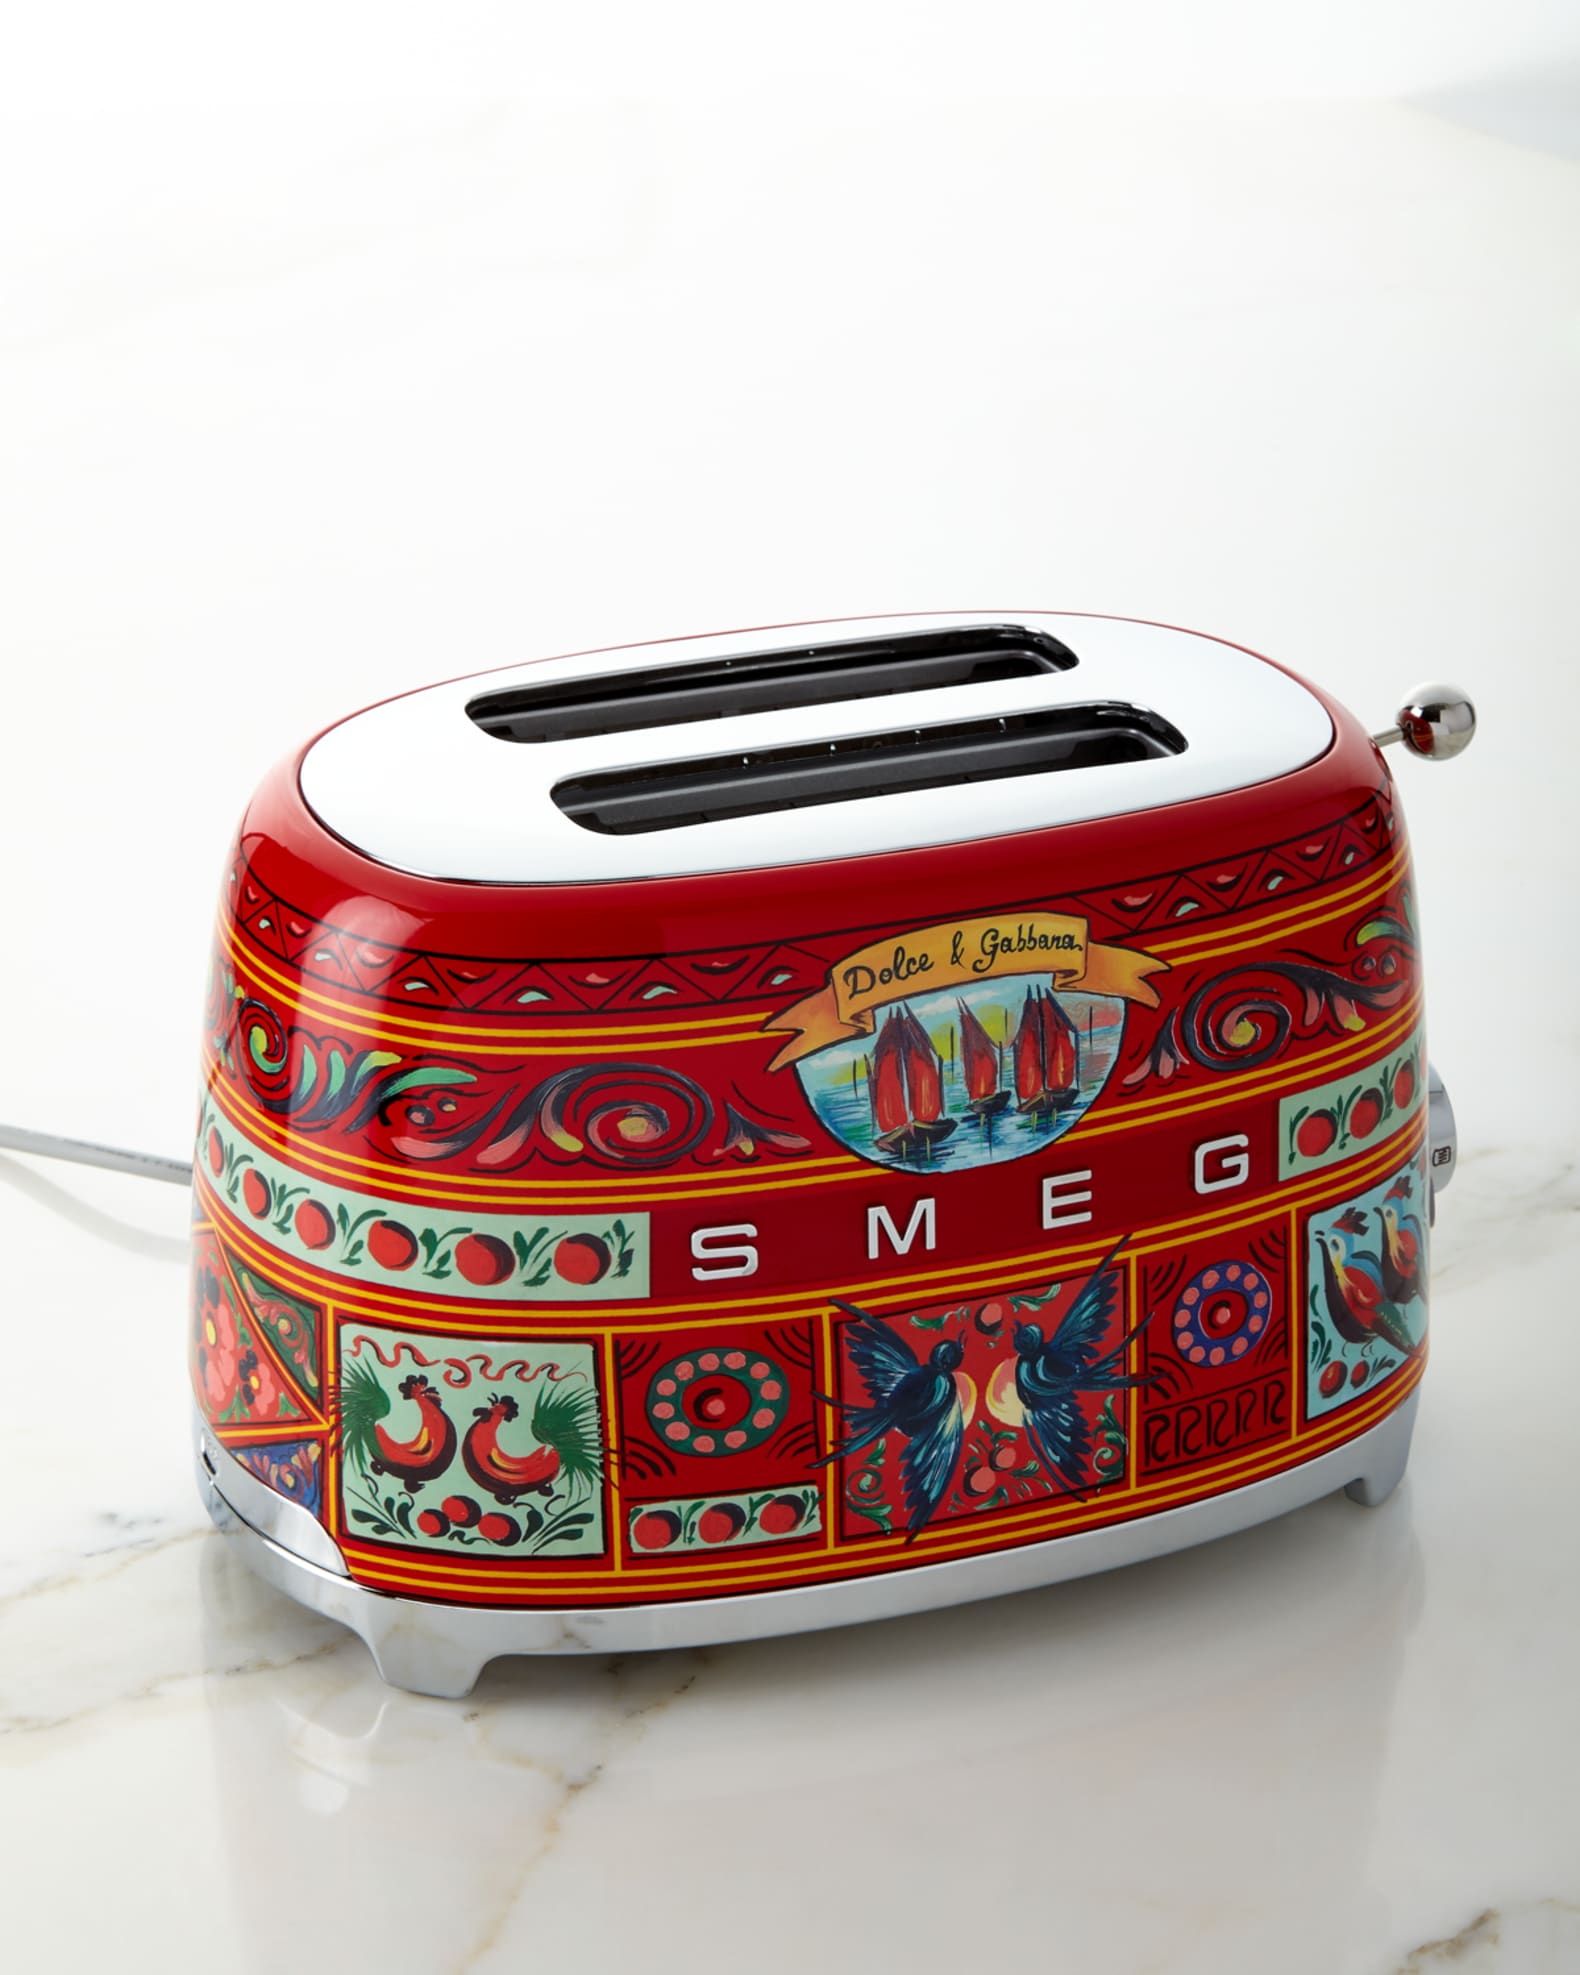 Smeg Toaster vs  Dupe  What I Love About Each One!